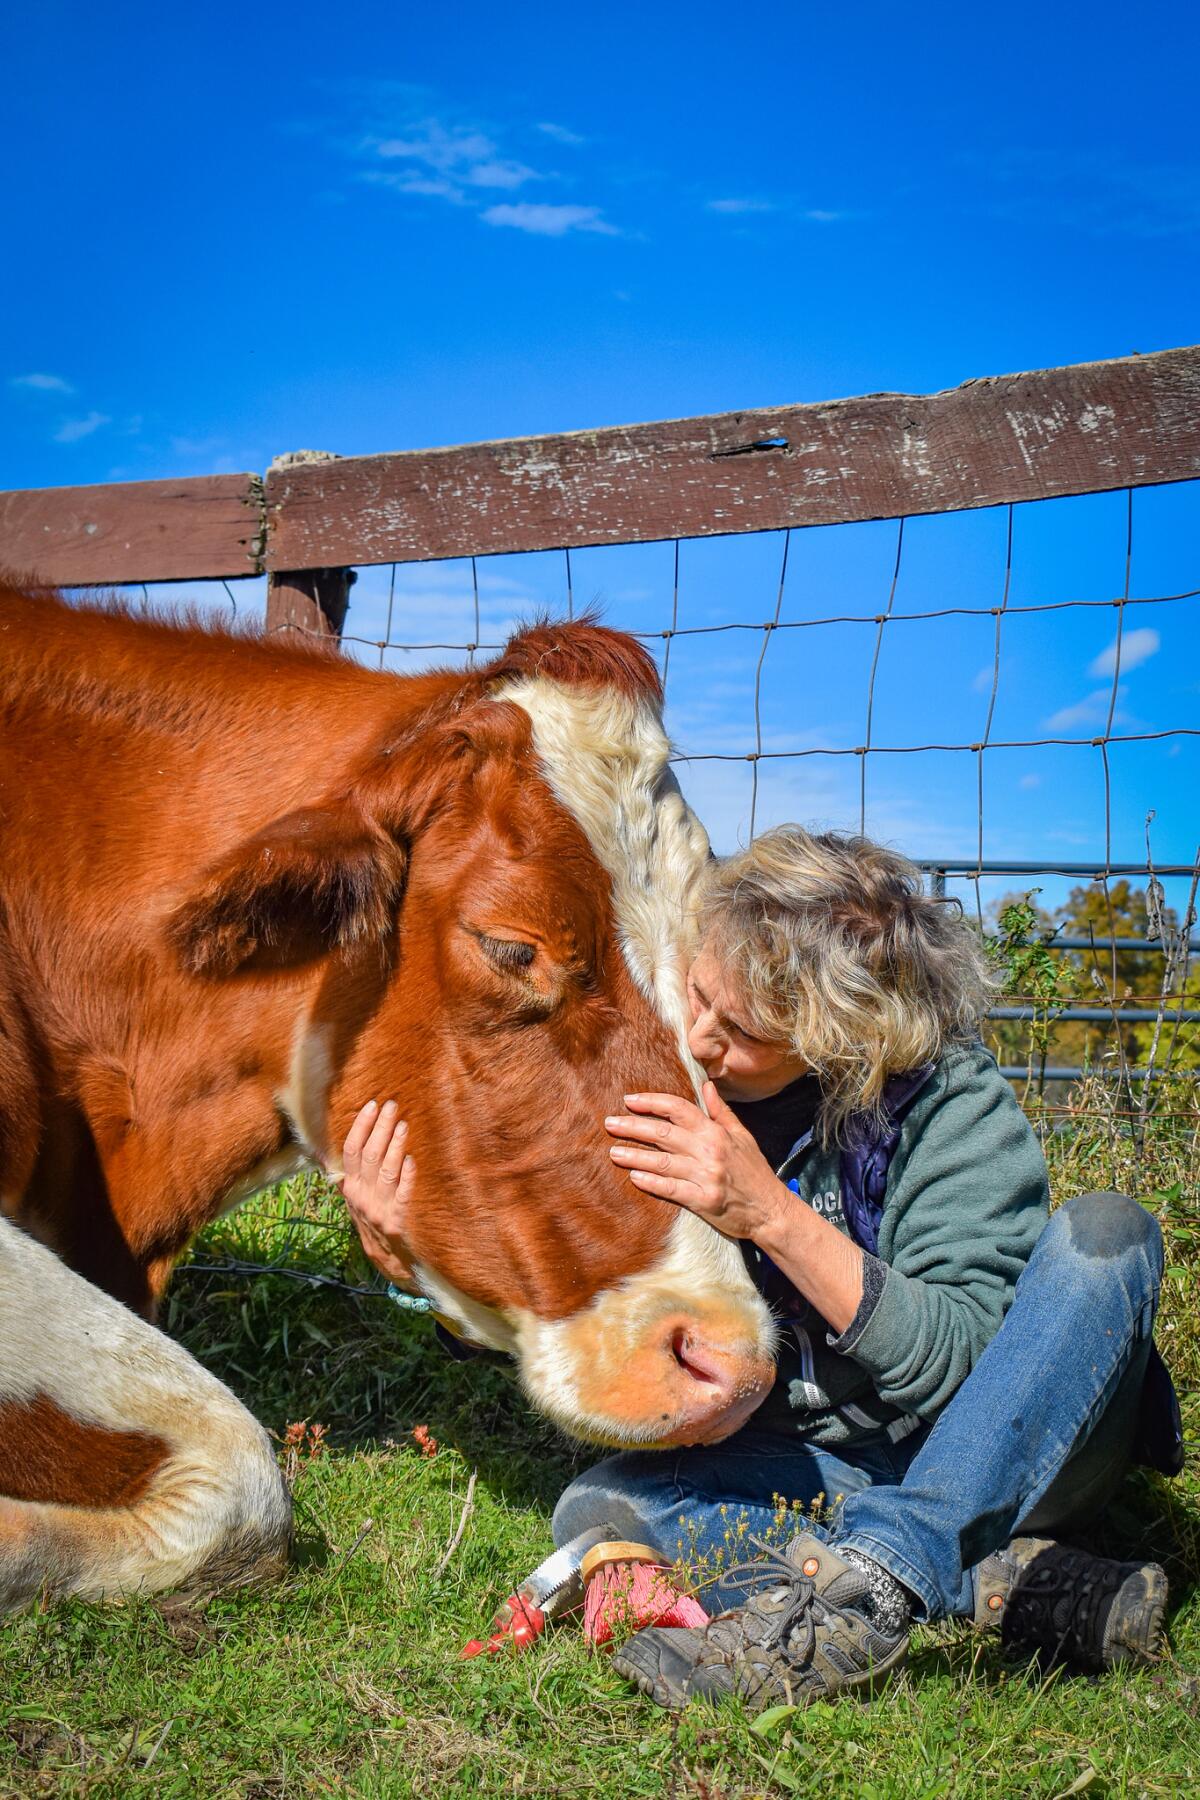 Kathy Stevens kisses a cow on its forehead as they sit on the grass.